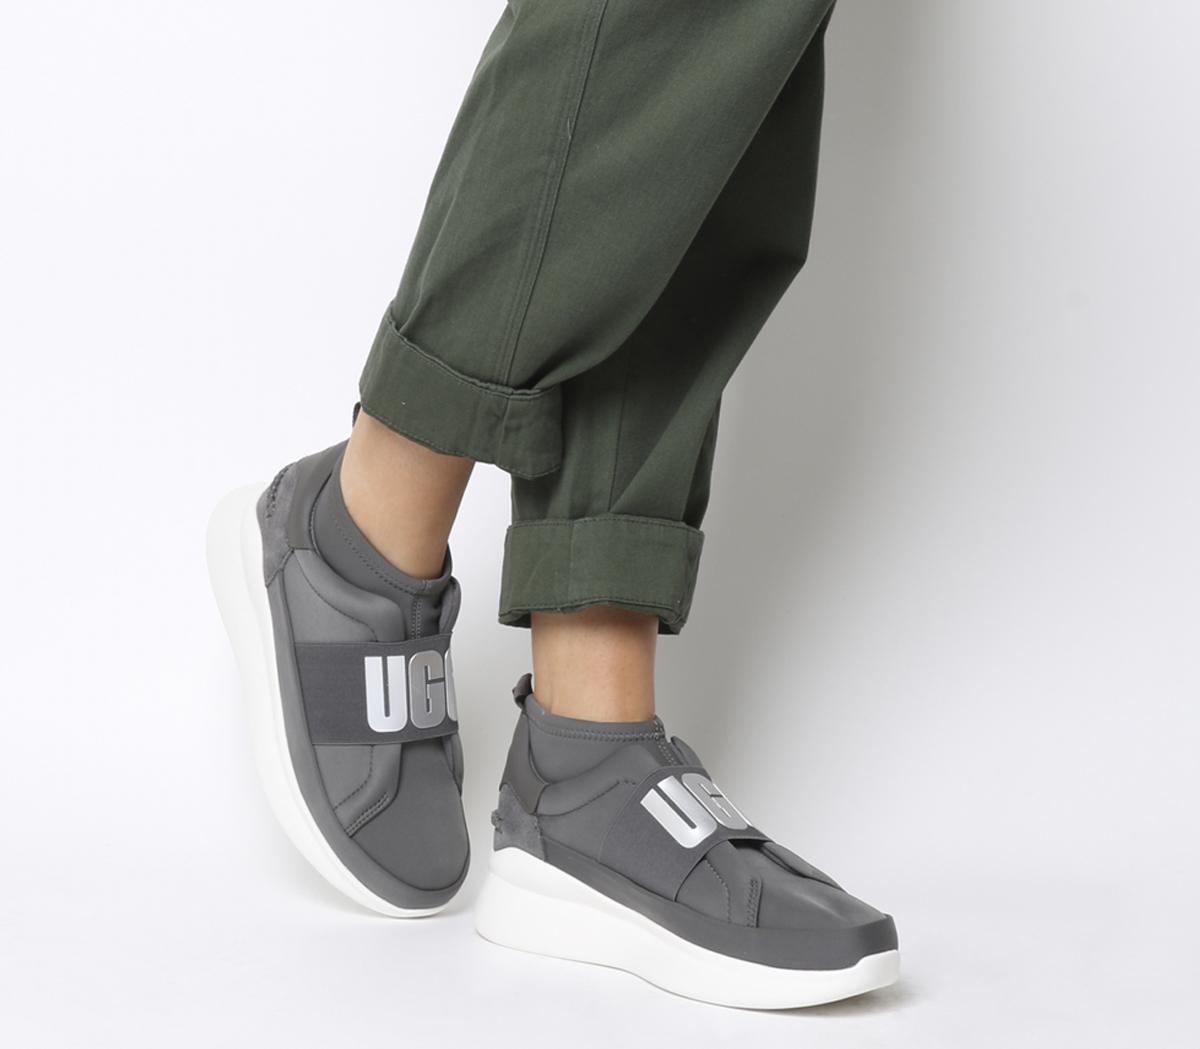 UGG Neutra Sneakers Charcoal - Flats